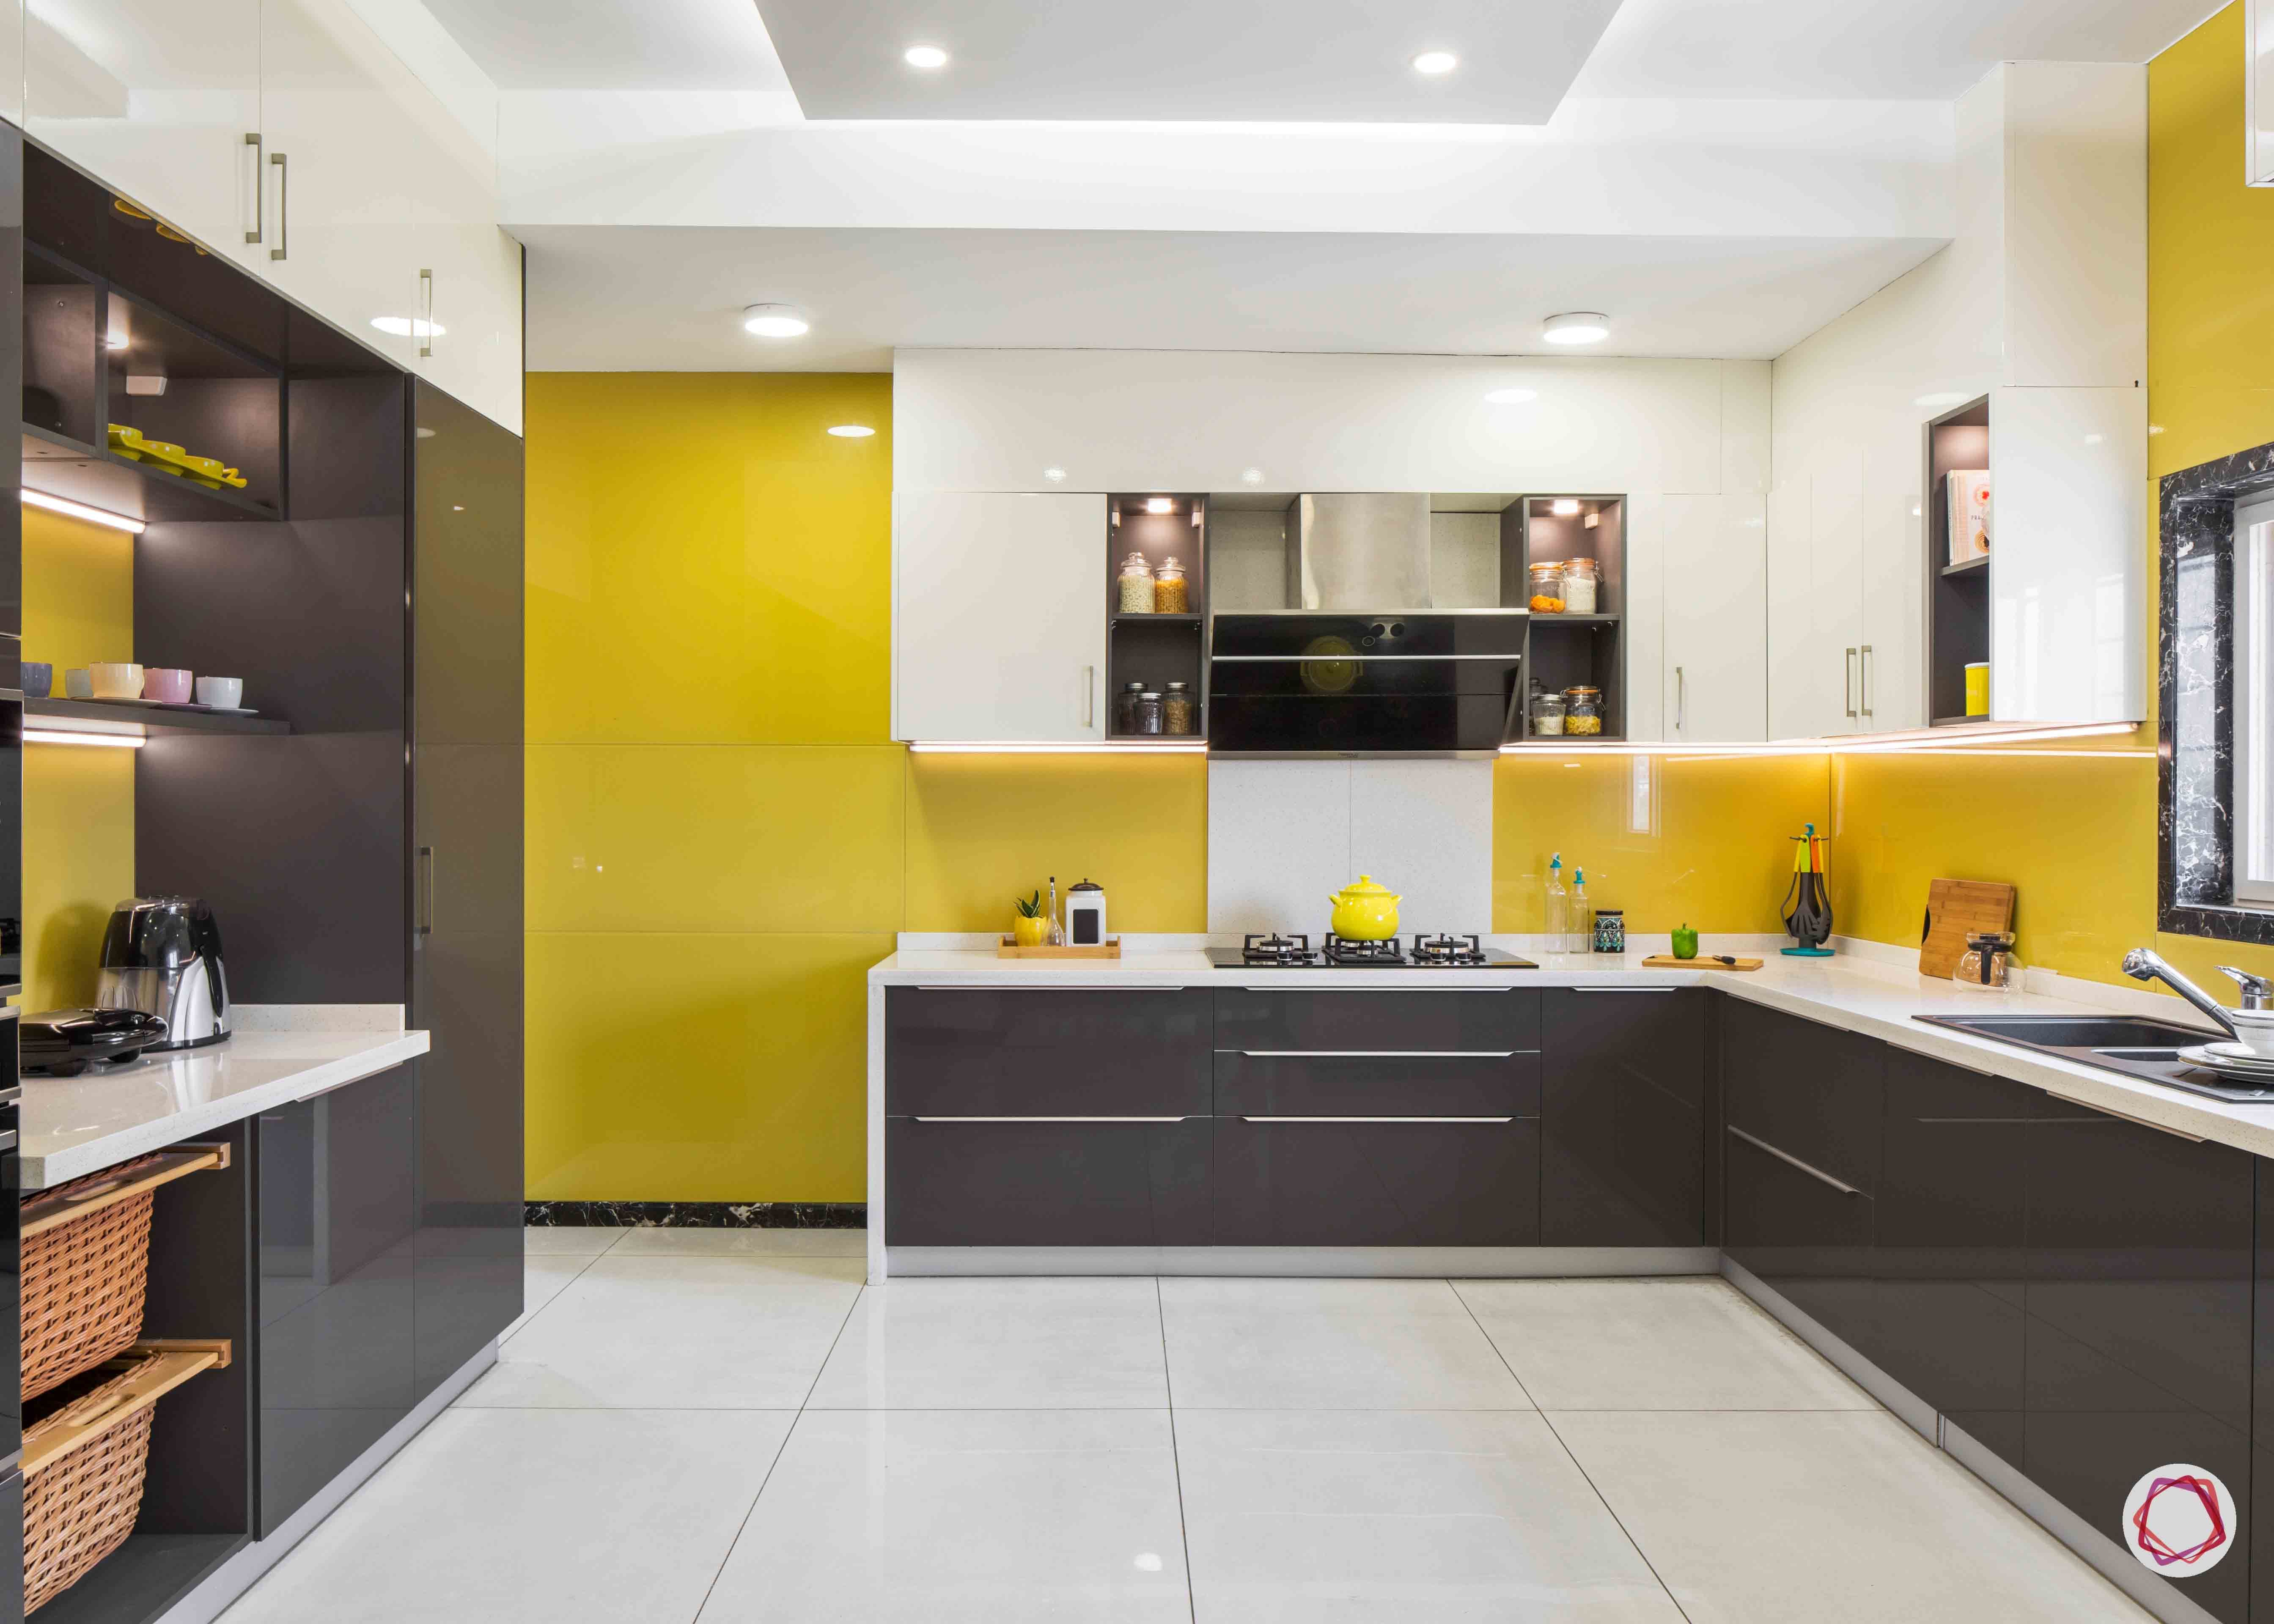 modular-kitchen-design-images-yellow-lacquered-glass-wicker-basket-drawer-handles